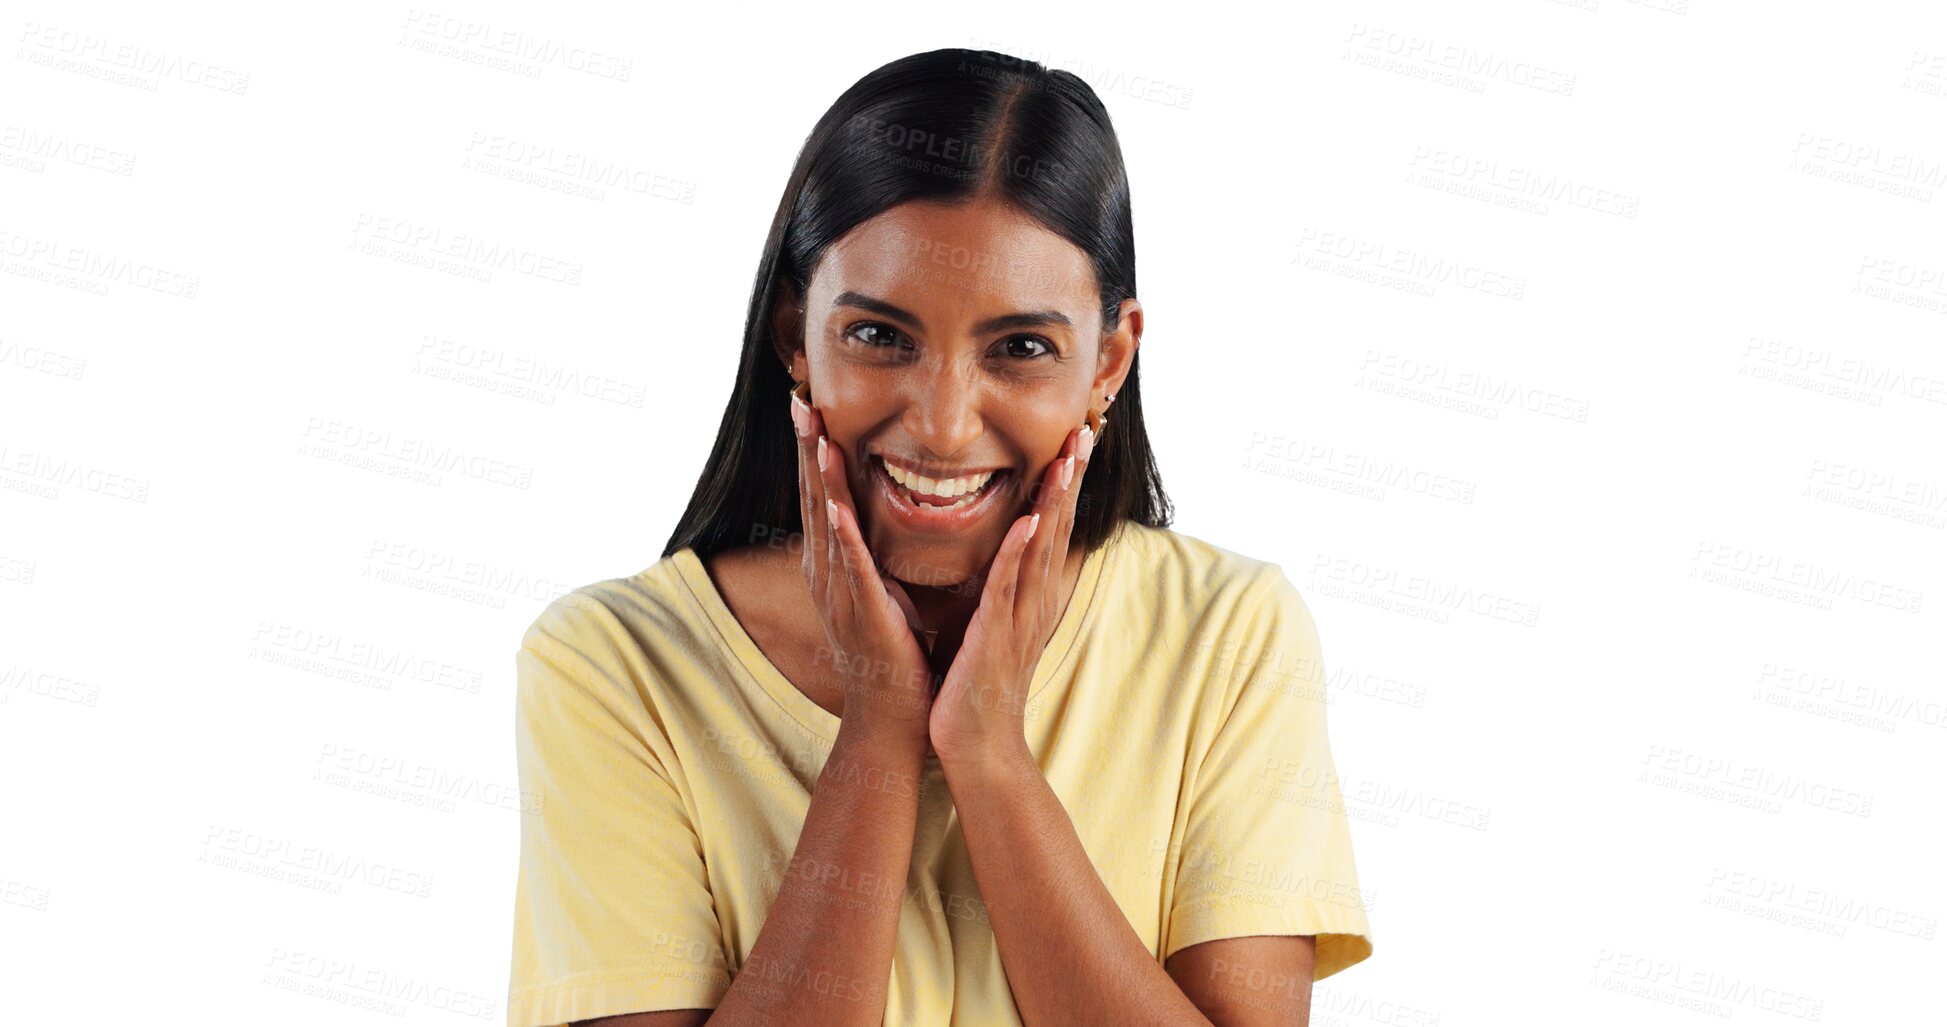 Buy stock photo Excited, happy woman or portrait with wow, surprise and smile for winning isolated on png background. Transparent, sales offer or female Indian person with motivation, announcement and achievement